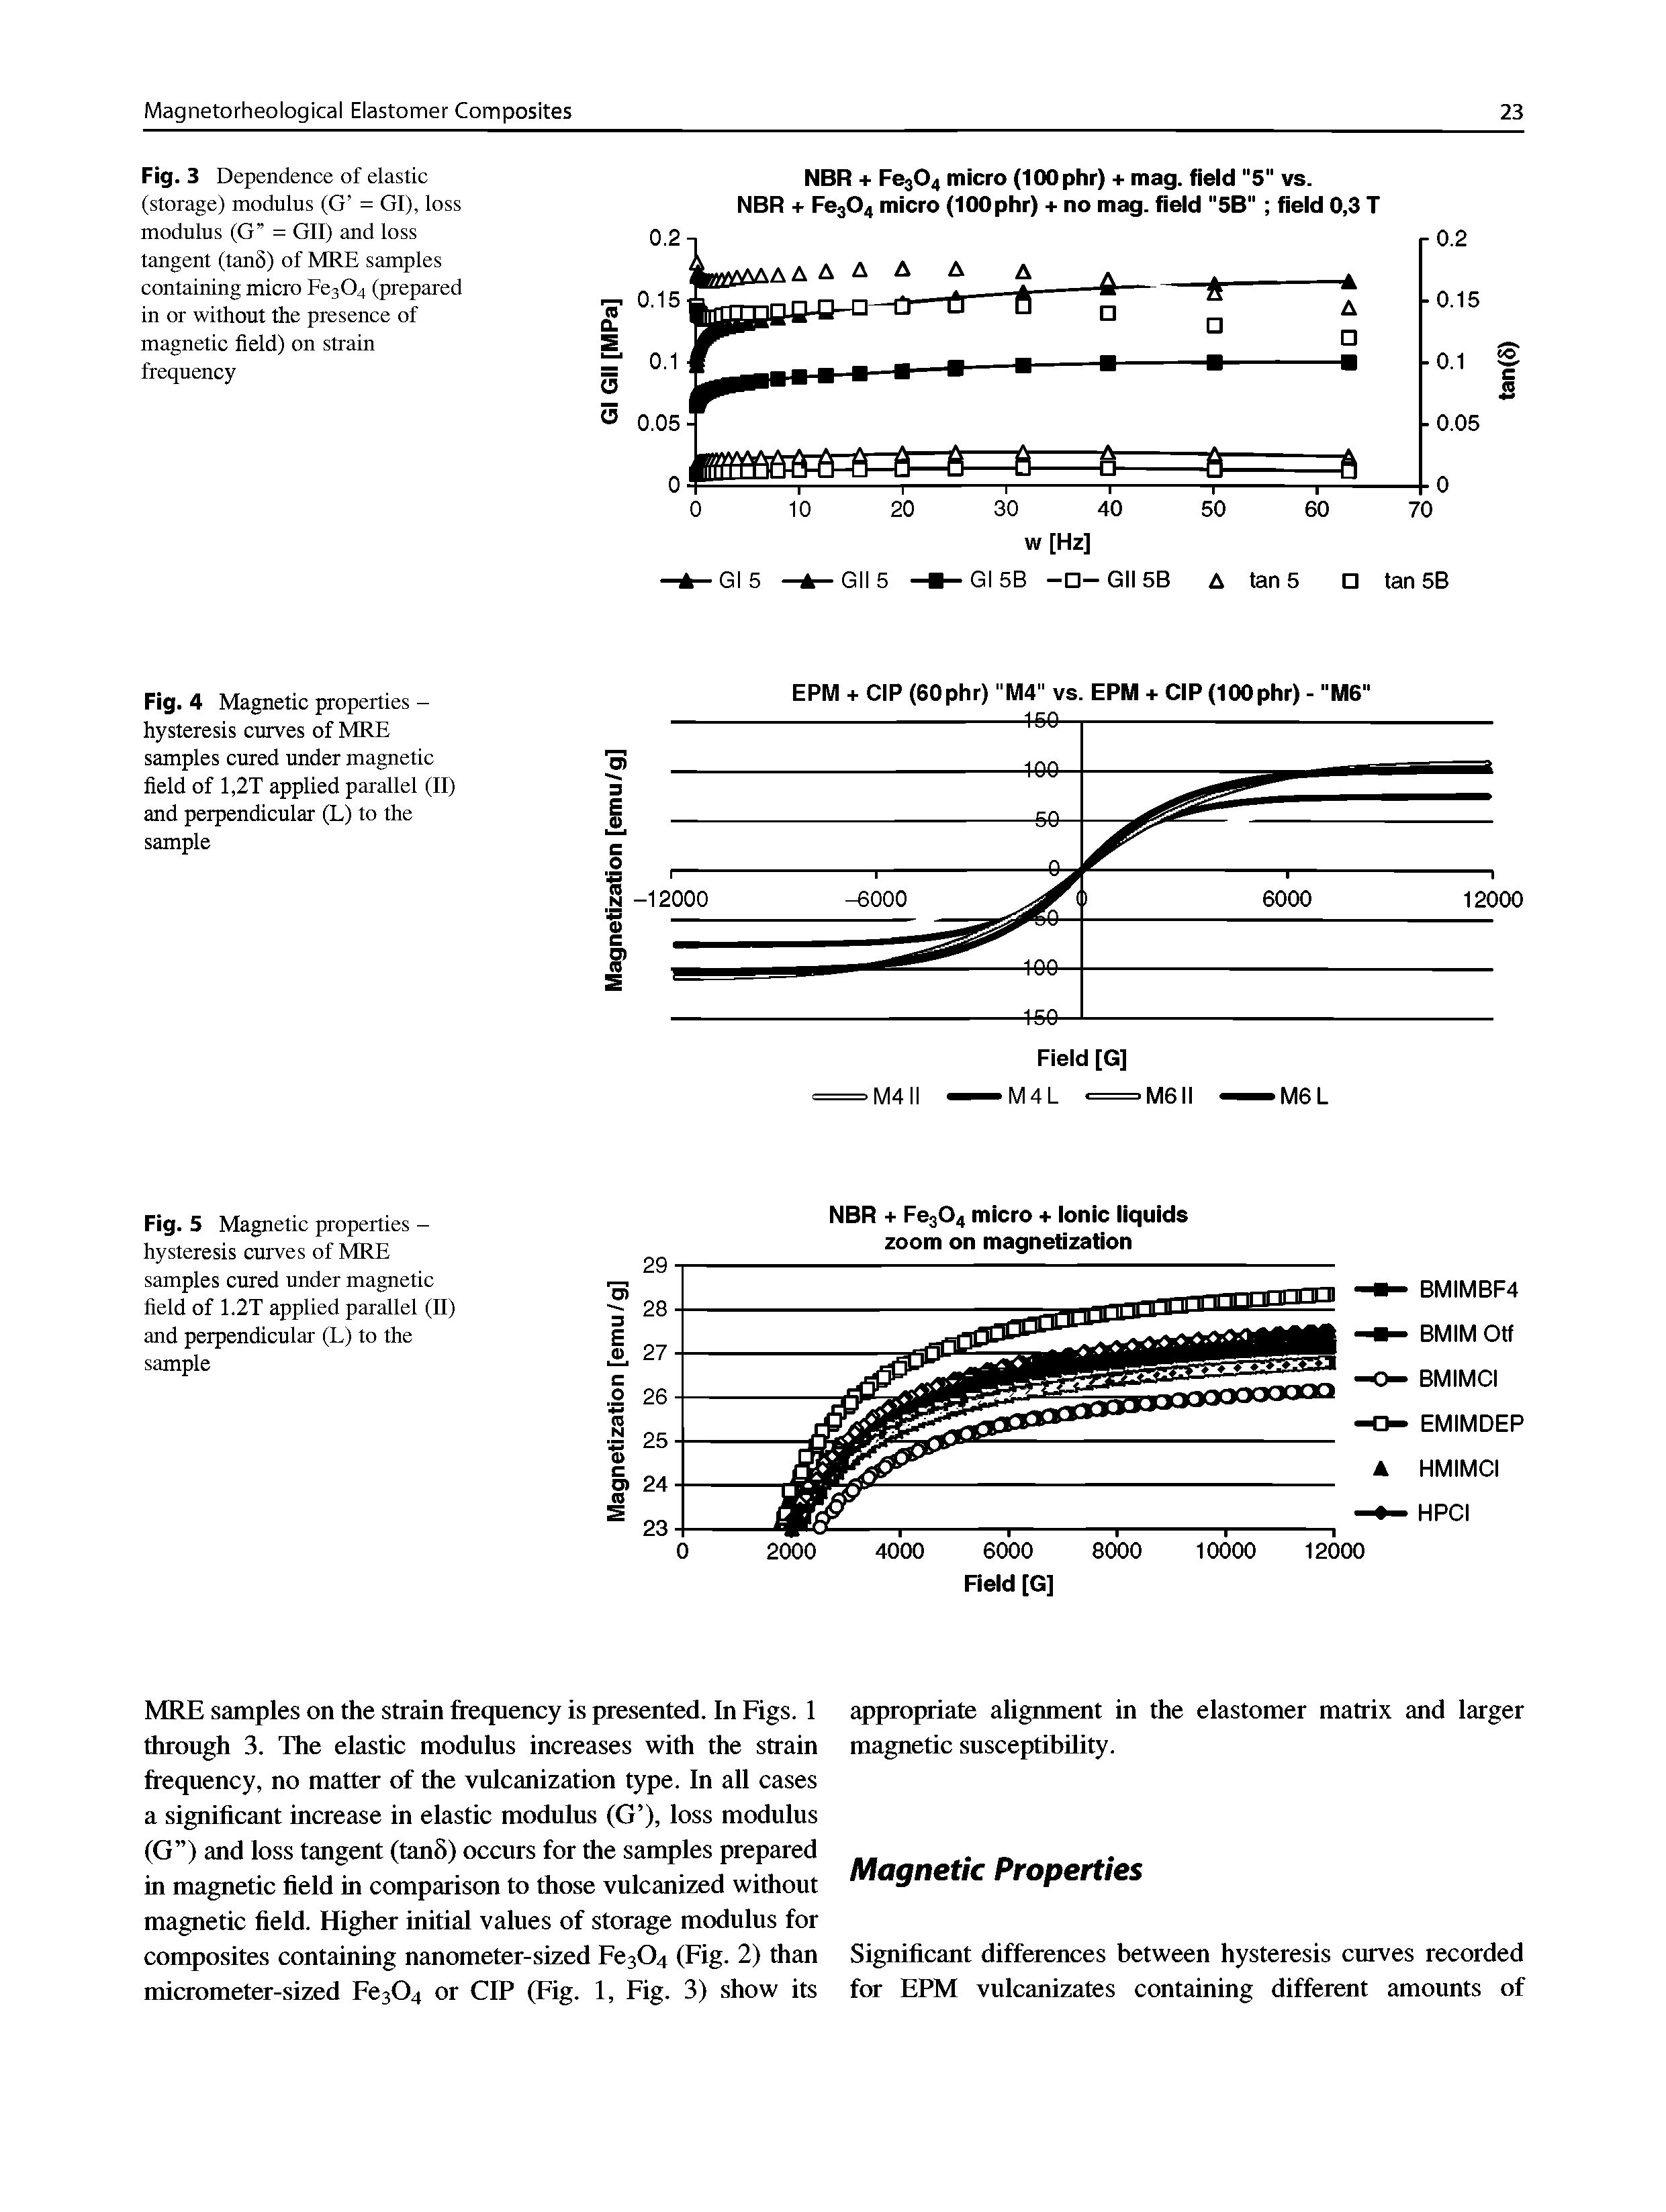 Fig. 4 Magnetic properties -hysteresis curves of MRE samples cured under magnetic field of 1,2T applied parallel (11) and perpendicular (L) to the sample...